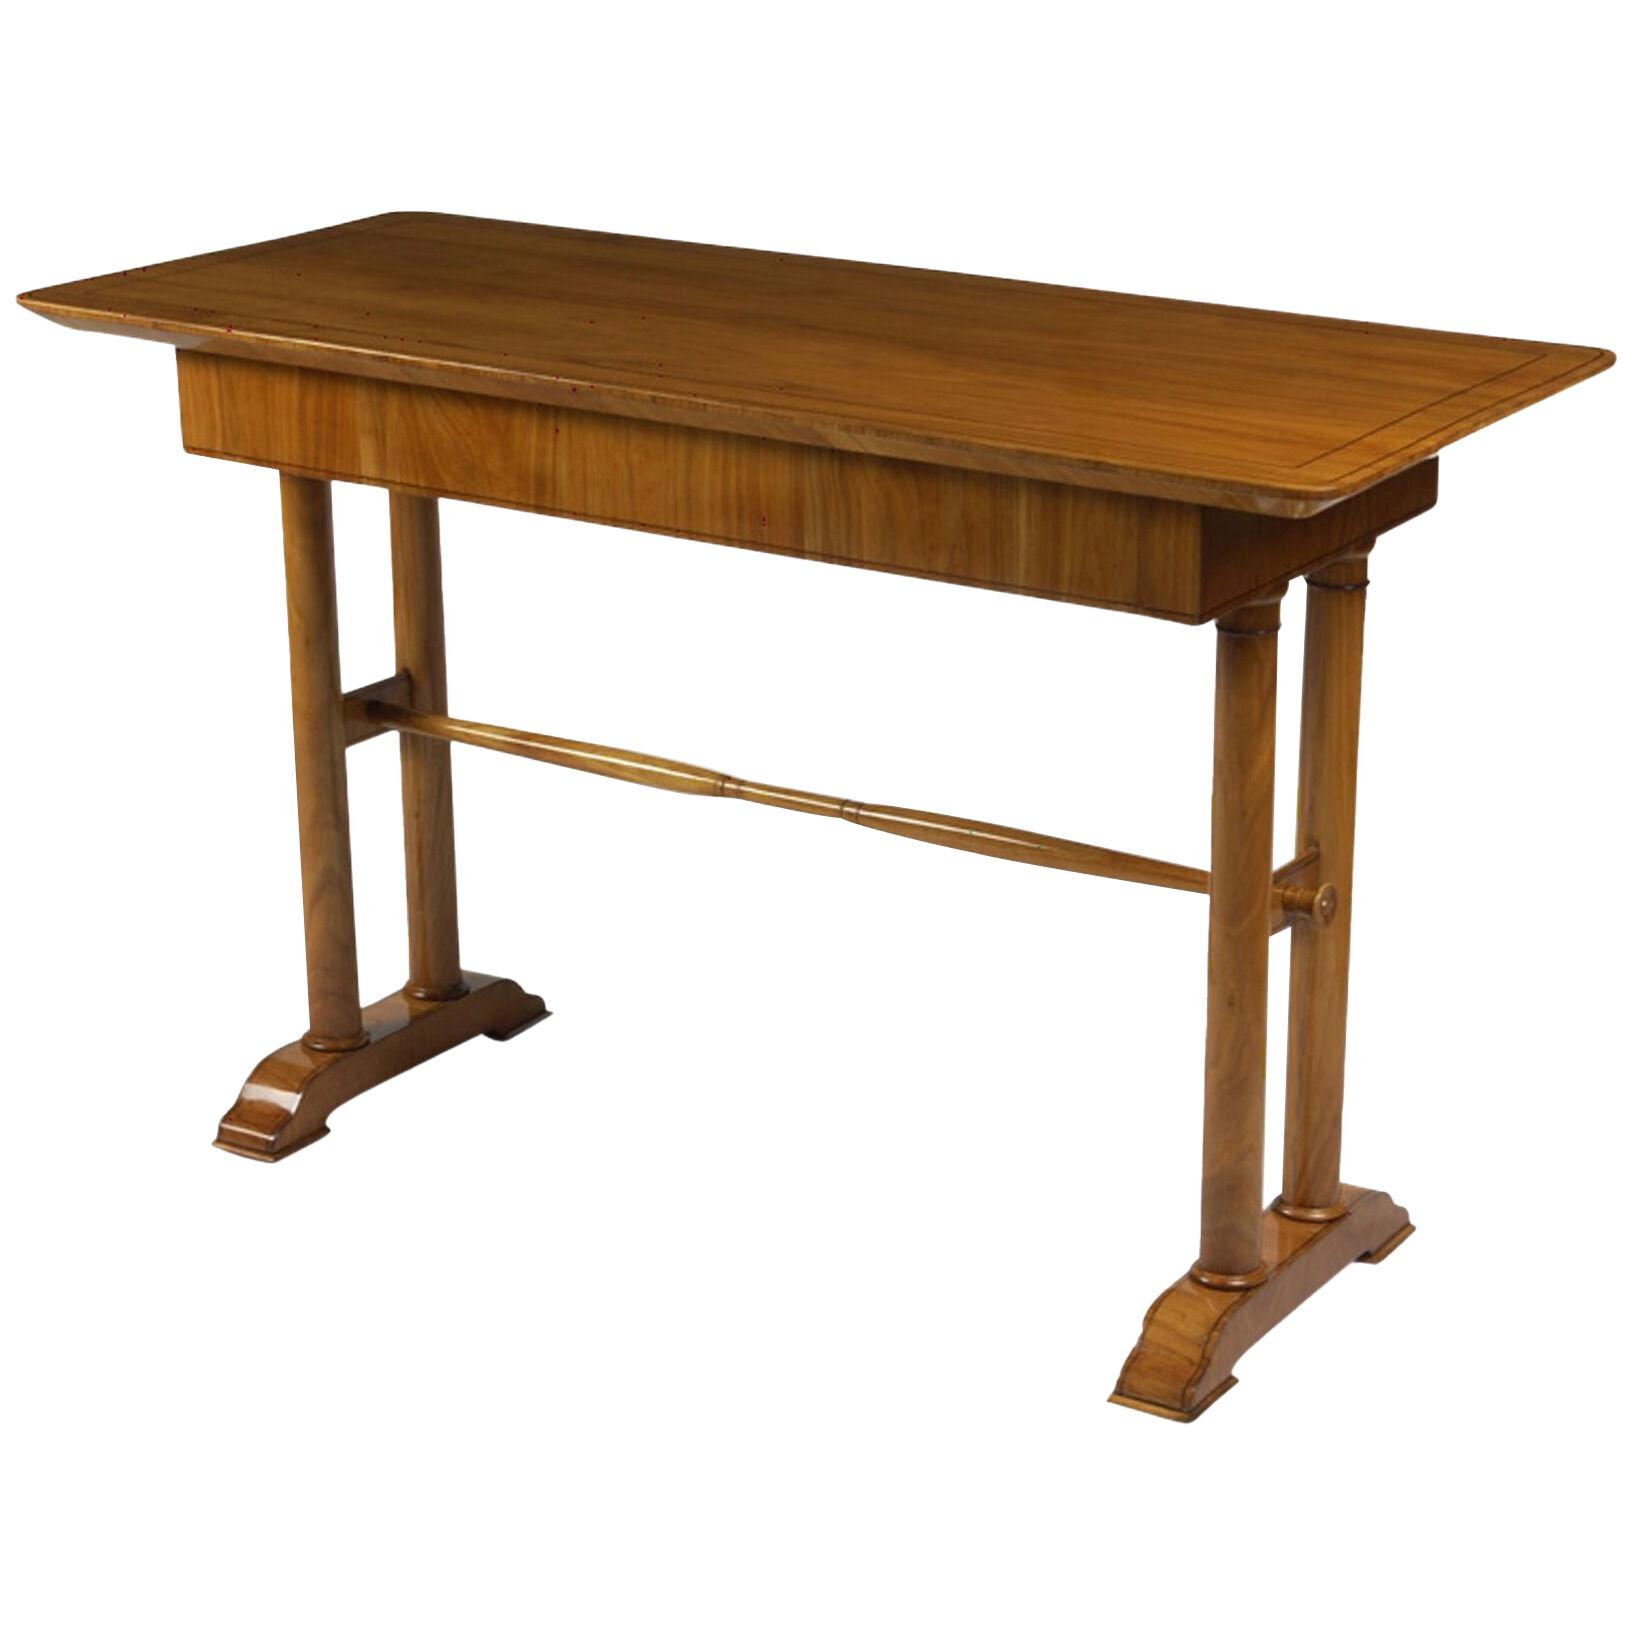 A Biedermeier writing Table with single drawer